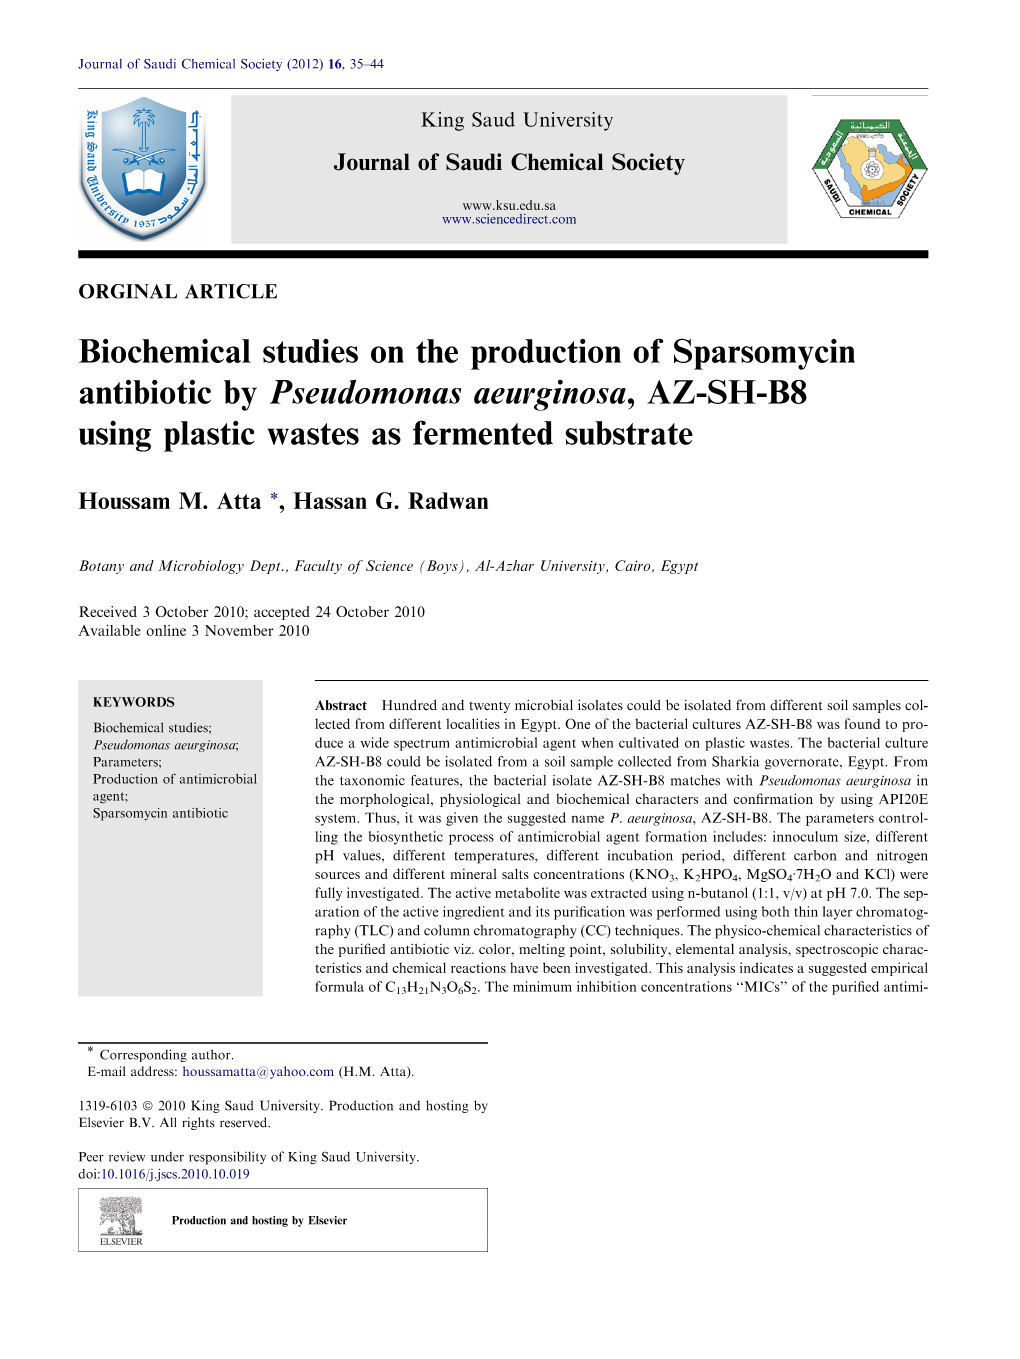 Biochemical Studies on the Production of Sparsomycin Antibiotic by Pseudomonas Aeurginosa, AZ-SH-B8 Using Plastic Wastes As Fermented Substrate